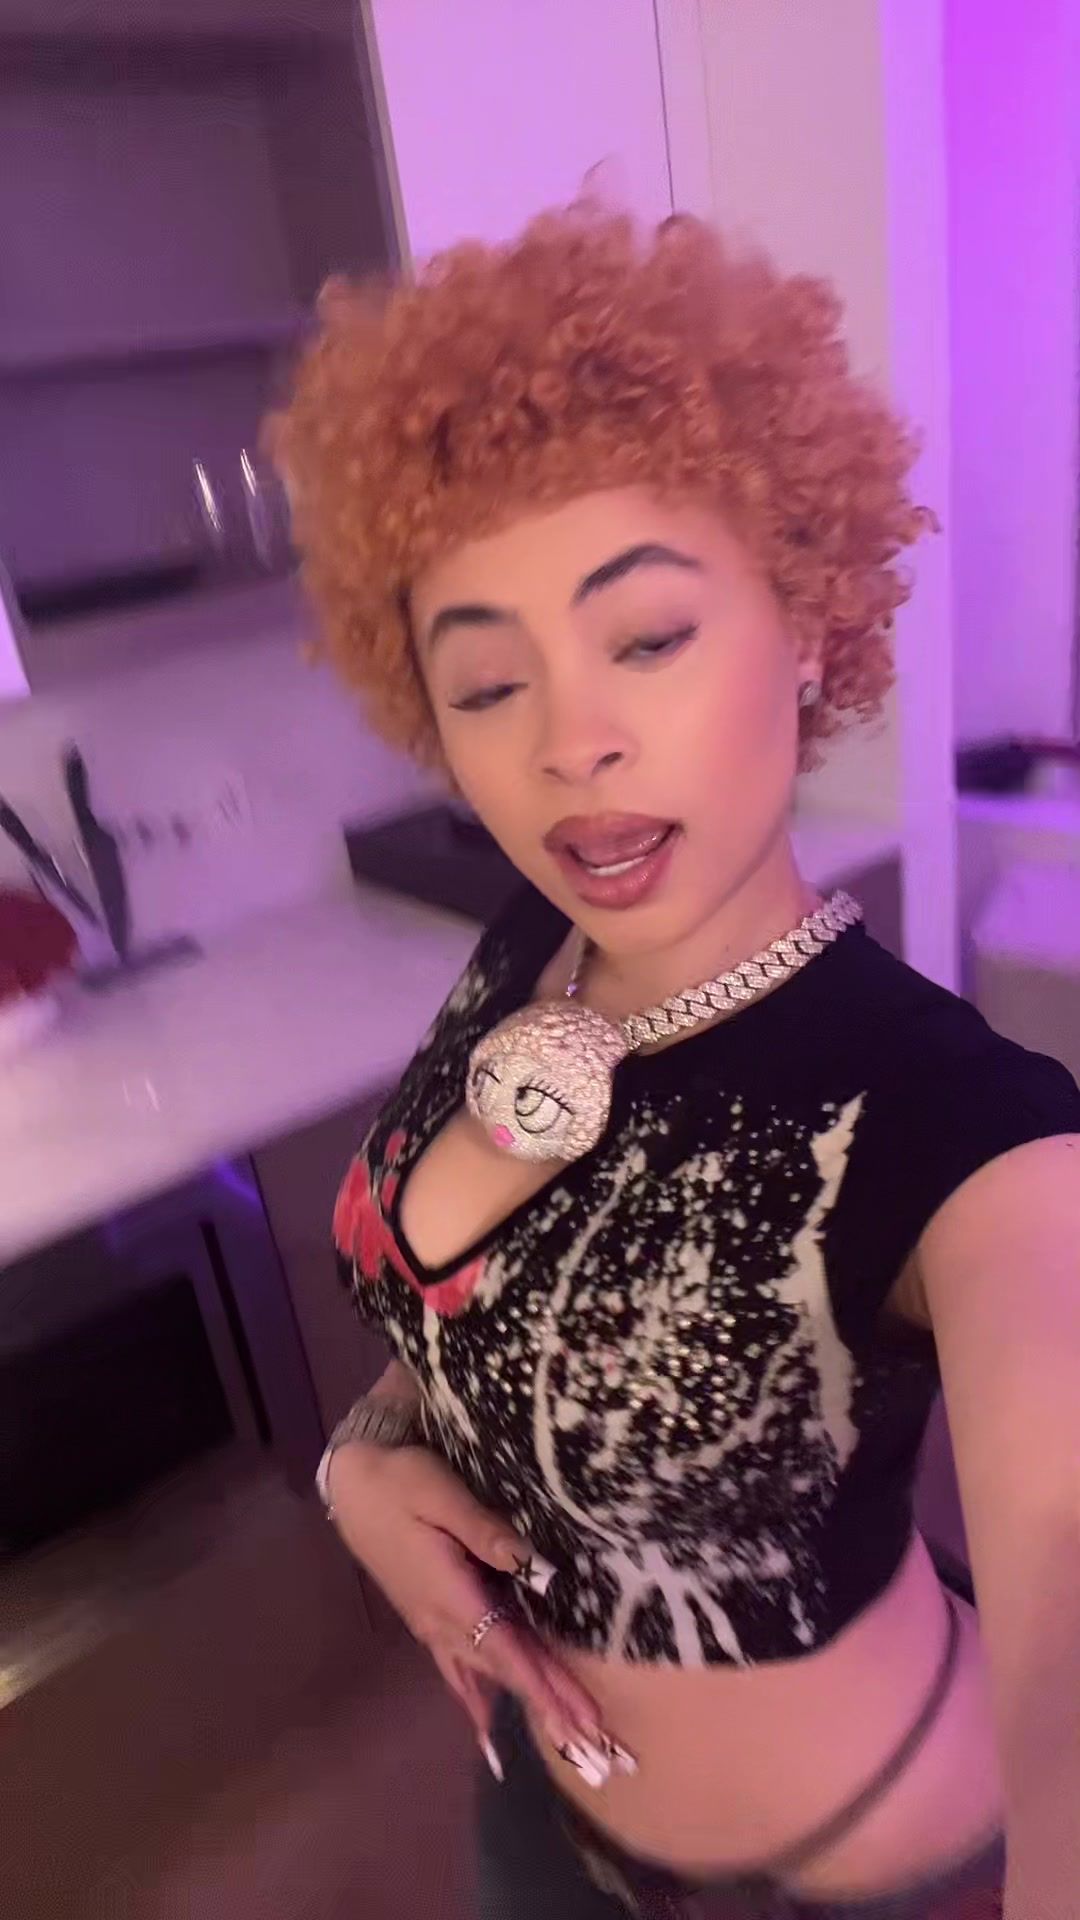 Cardi B shows off her new short hairdo in a video shared on Instagram. - Ice Spice